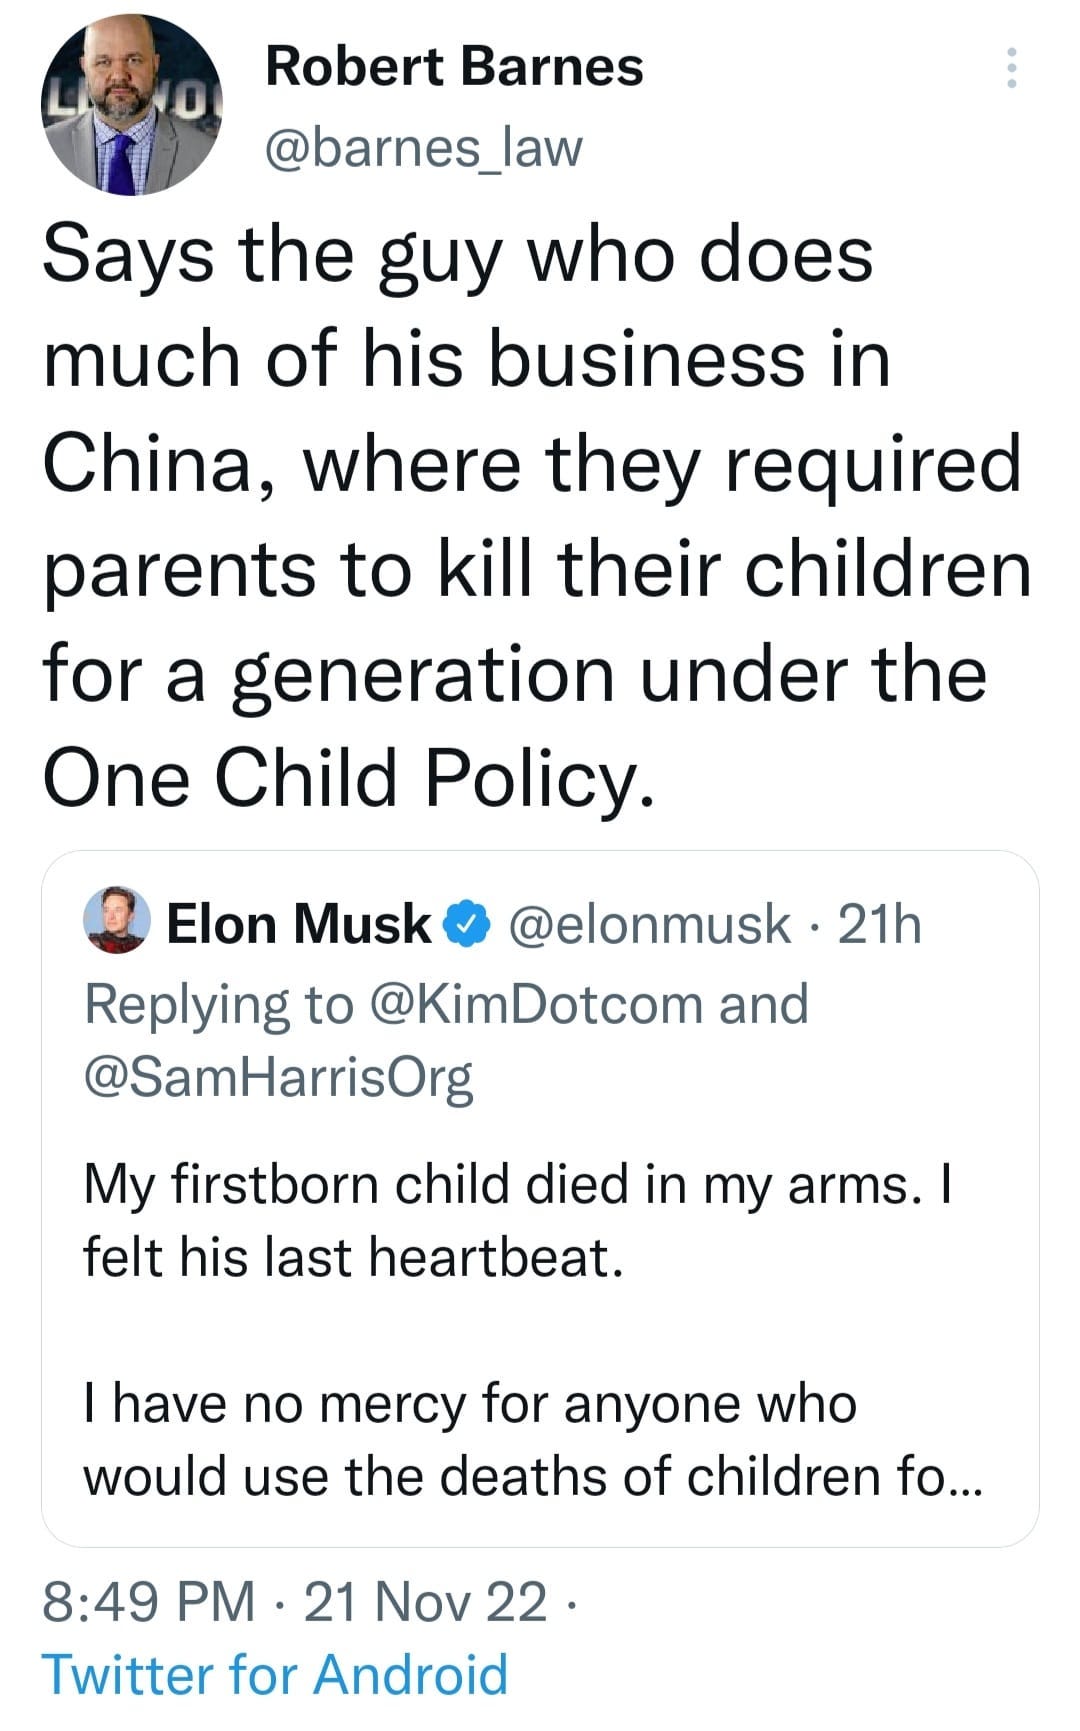 May be a Twitter screenshot of 2 people and text that says 'Robert Barnes @barnes_law Says the guy who does much of his business in China, where they required parents to kill their children for a generation under the One Child Policy. Elon Musk @elonmusk Replying to @KimDotcom and @SamHarrisOrg 21h My firstborn child died in my arms. felt his last heartbeat. I have no mercy for anyone who would use the deaths of children fo... 8:49 PM 21 Nov 22 Twitter for Android'